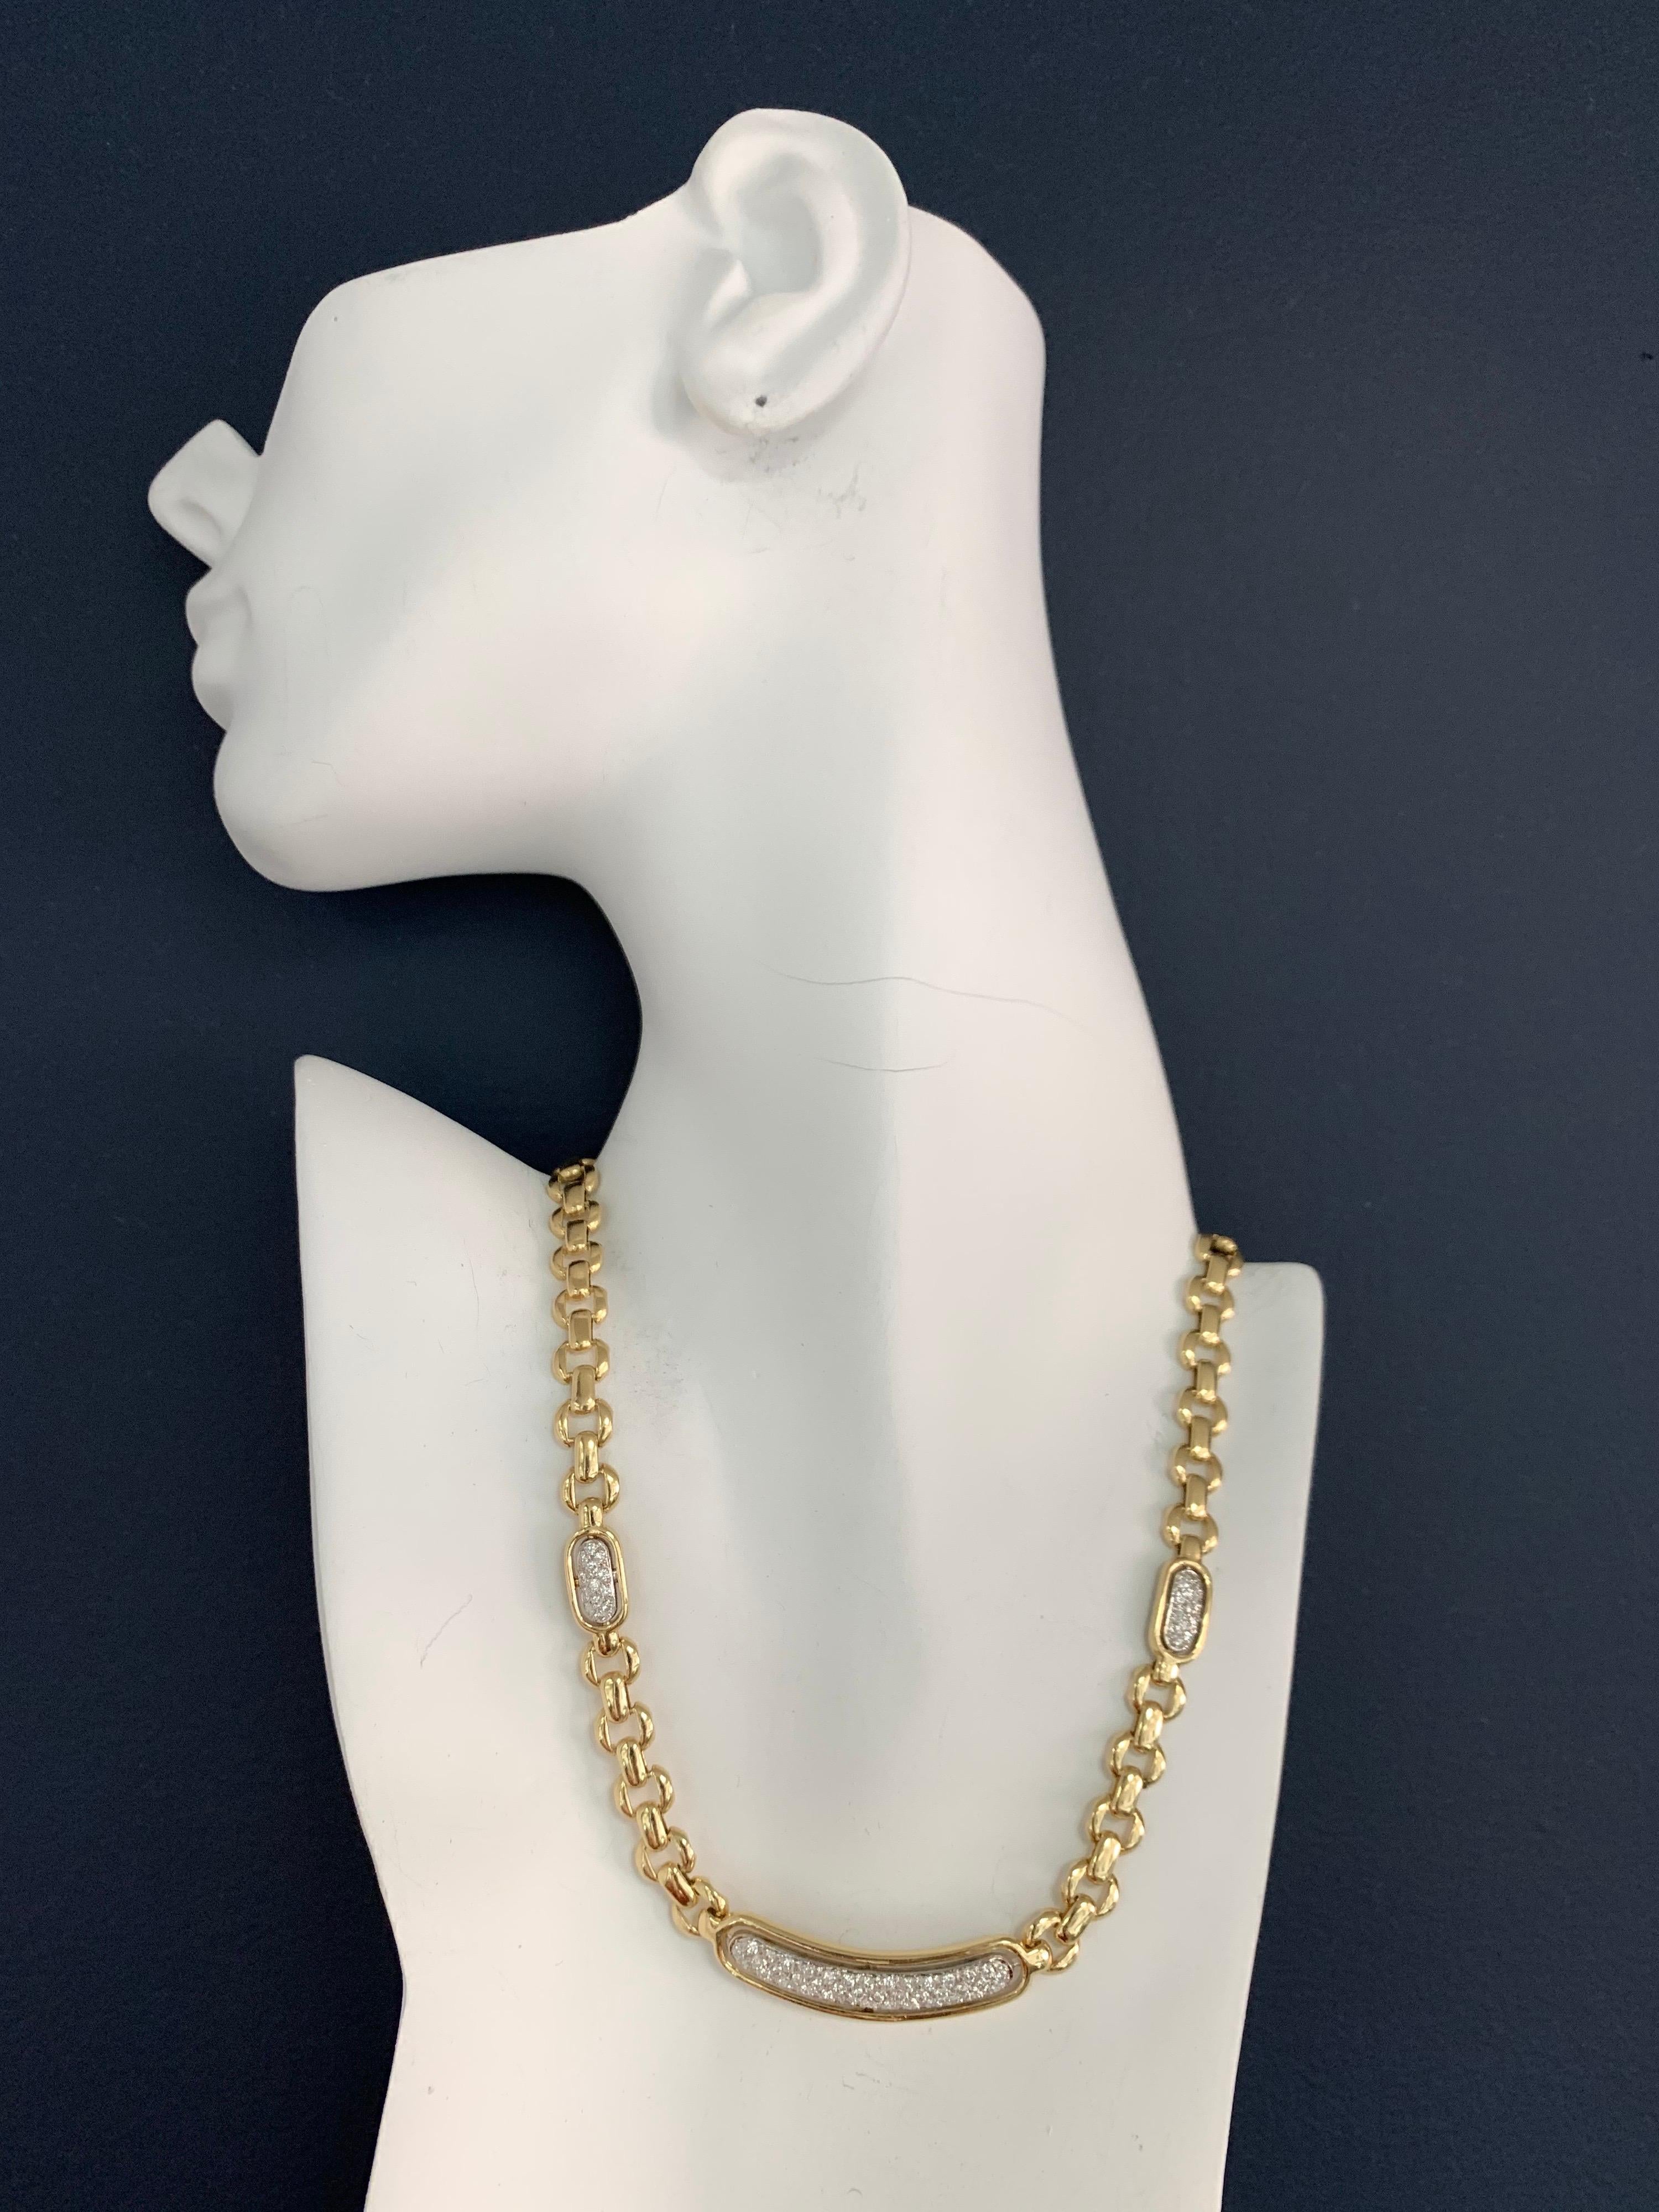 Modern 14K Yellow Gold 1.50 Carat Natural Round Brilliant Diamond Necklace, Made in Italy, circa 1980. The 66 natural round brilliant diamonds are approximately G-H in color and VS-SI in clarity. 

The length of the necklace is 16.5